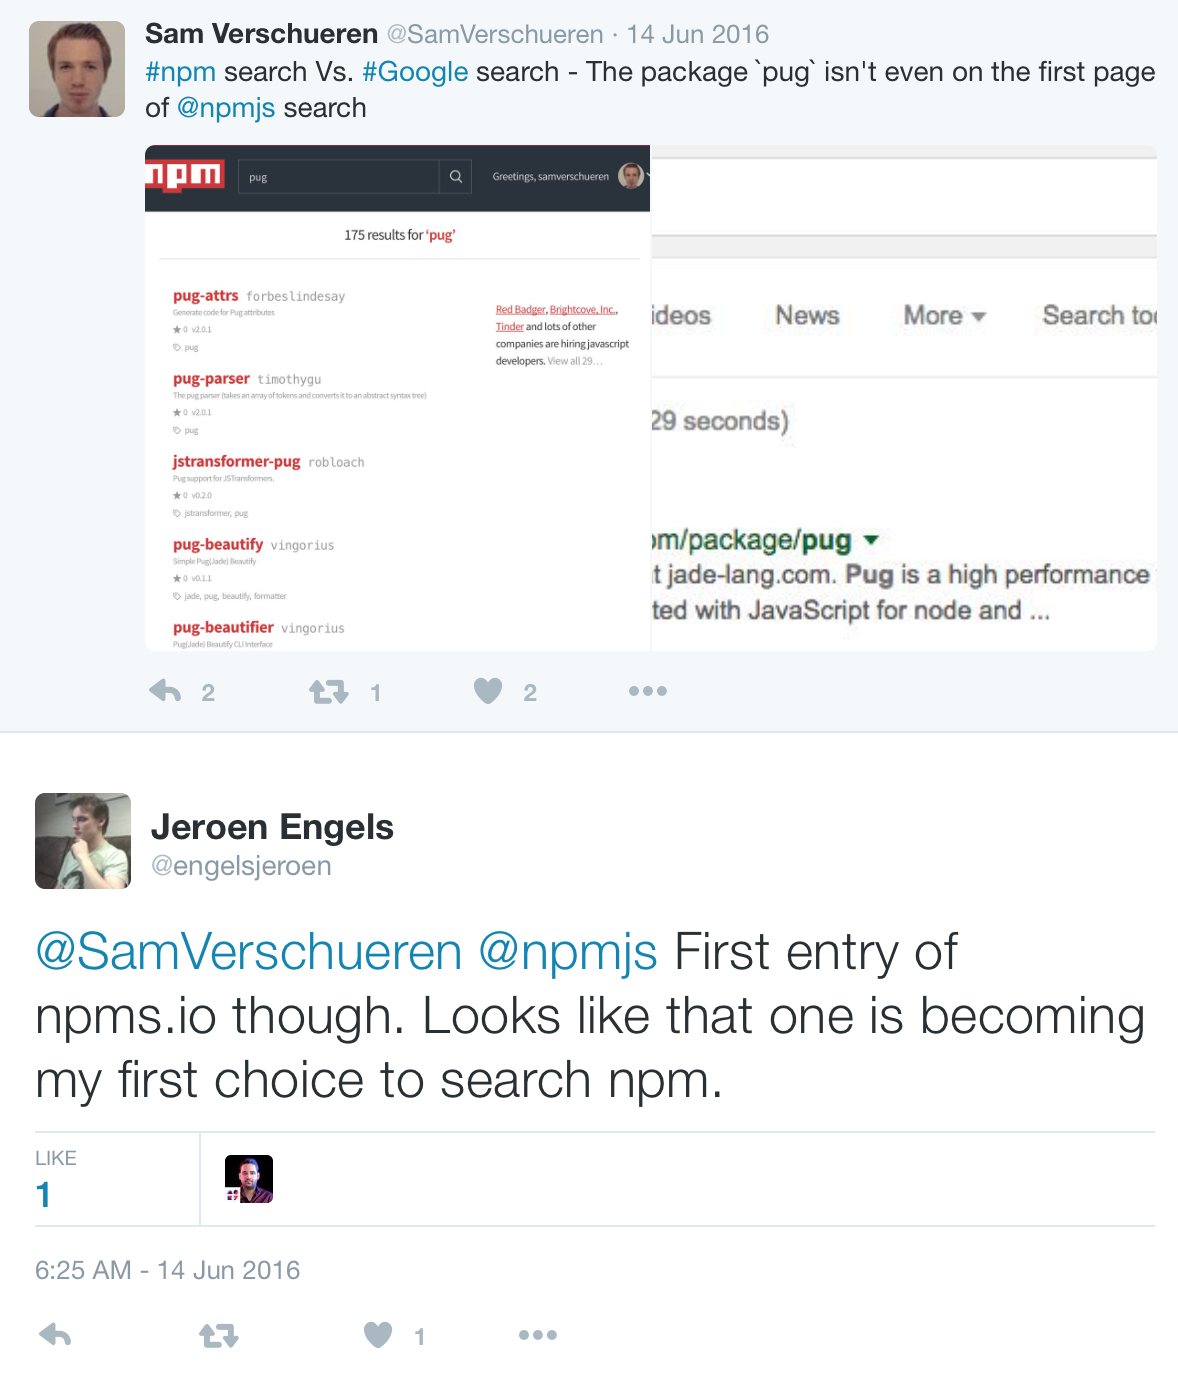 Jeroen Engels on Twitter: @SamVerschueren @npmjs First entry of npms.io though. Looks like that one is becoming my first choice to search npm.